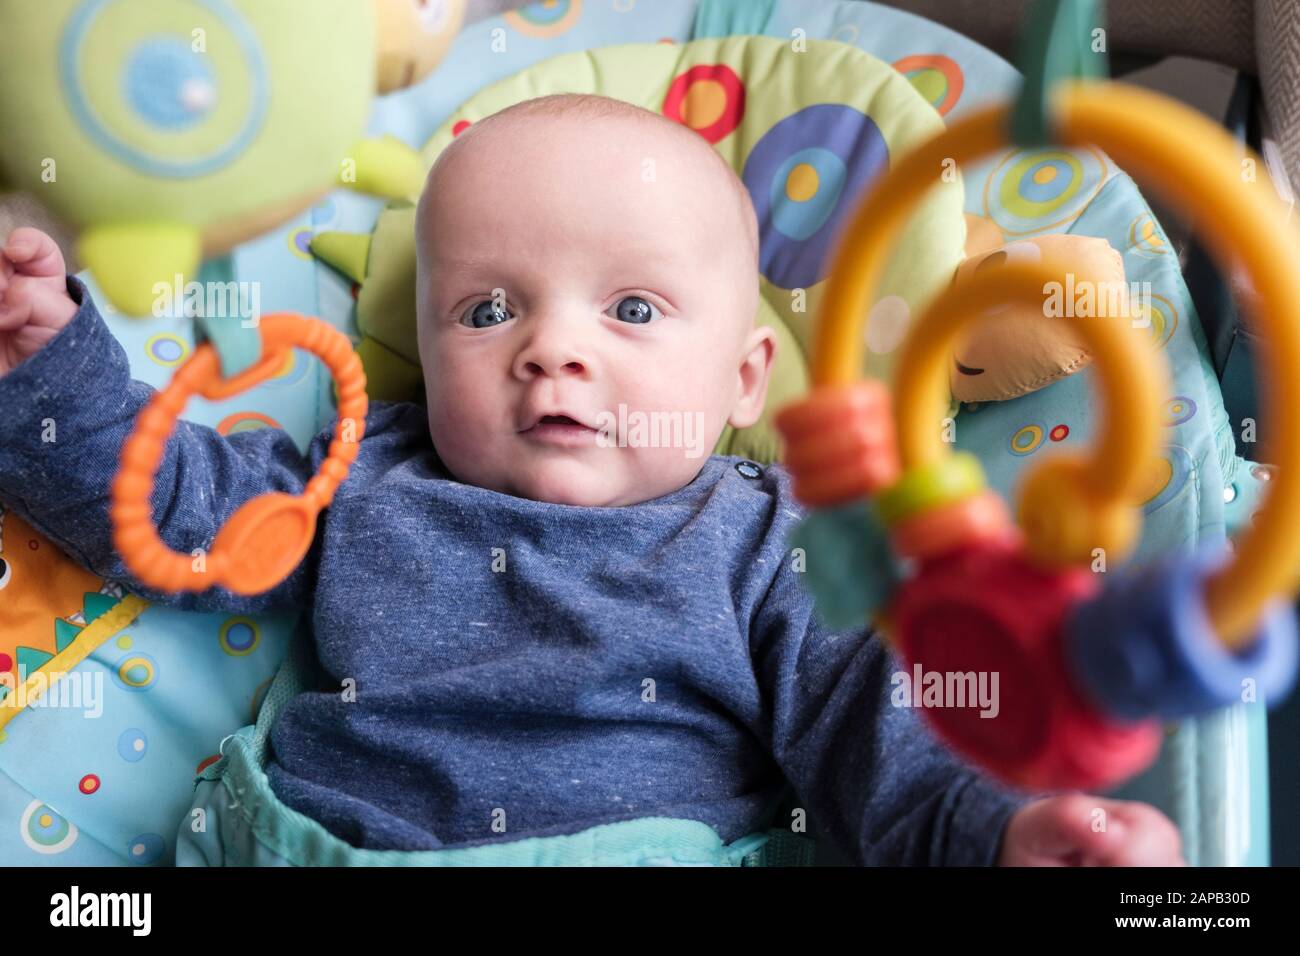 Authentic image of a cute baby boy age five months in an activity chair looking interested at interesting hanging toys. England, UK, Britain Stock Photo